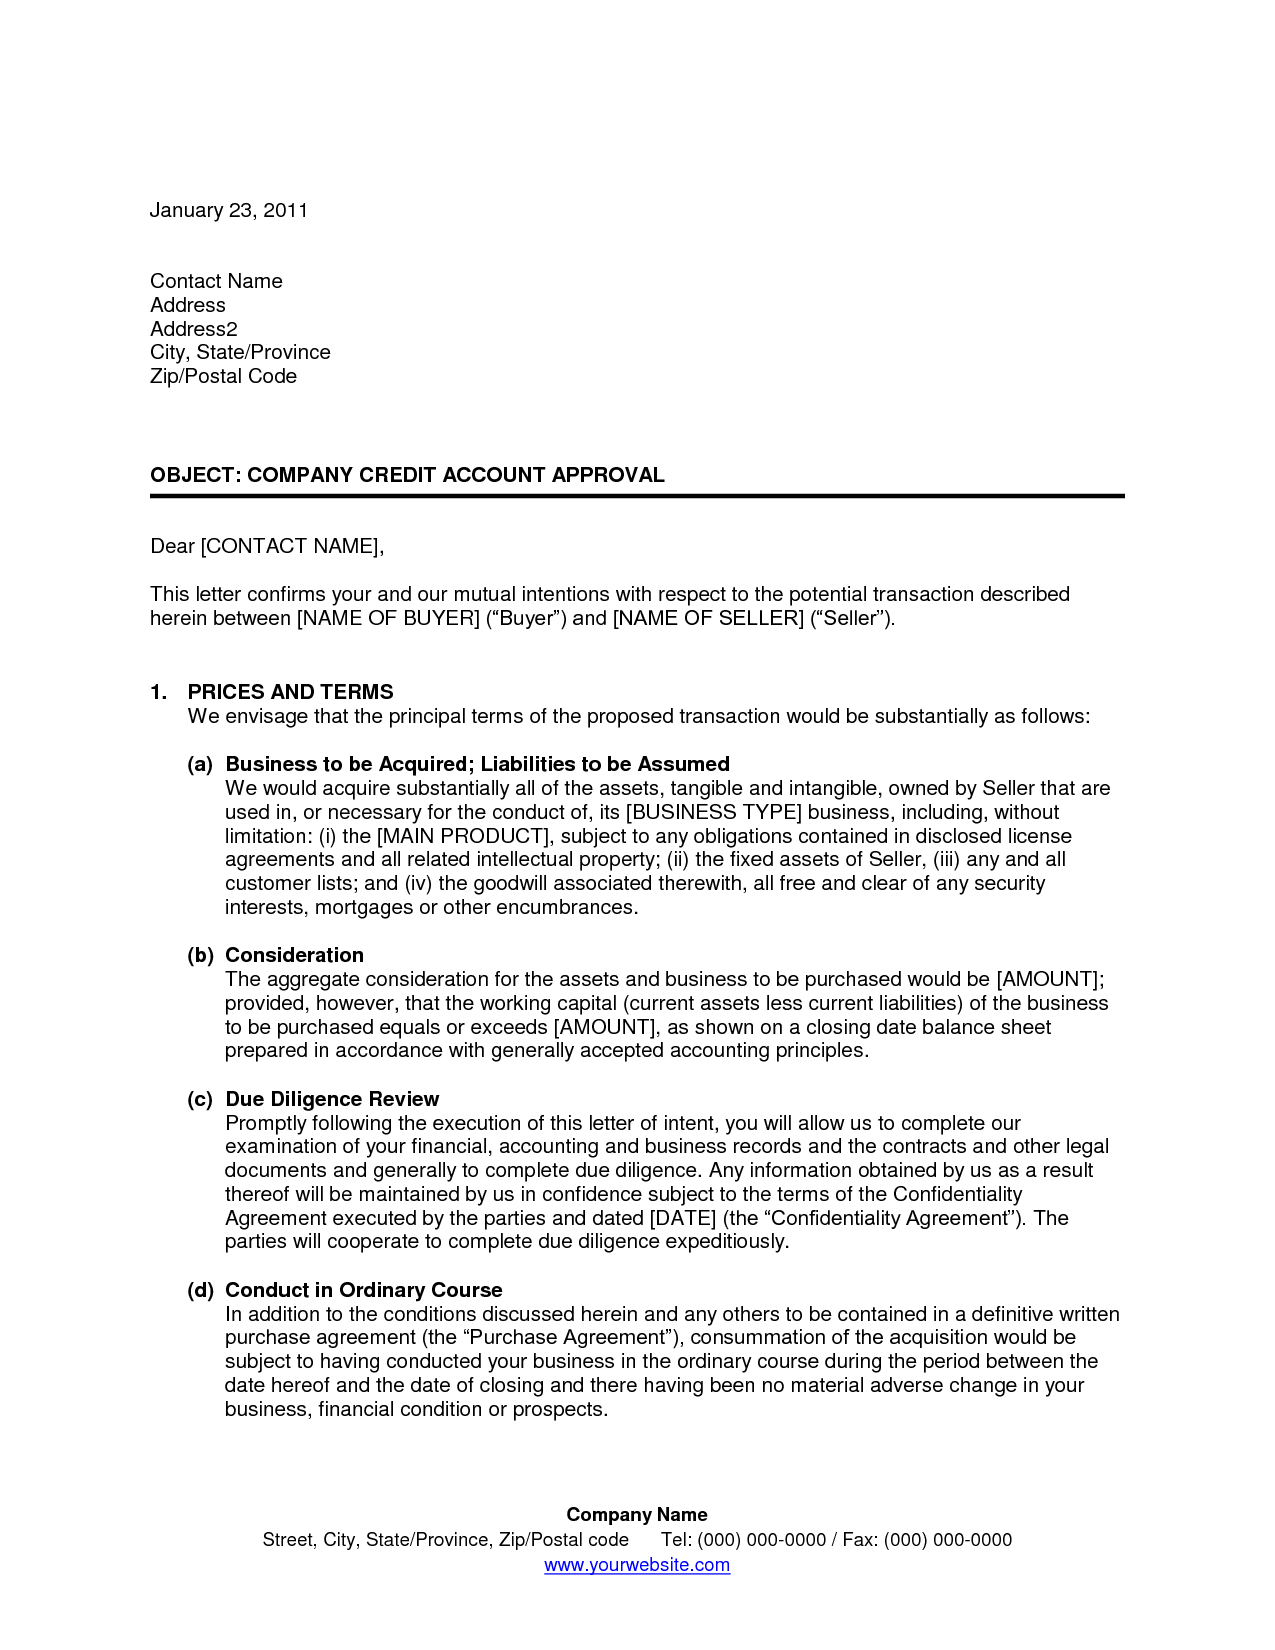 Letter Of Intent to Purchase Shares Template - Letter Intent to Purchase Business Word Document Canada Free